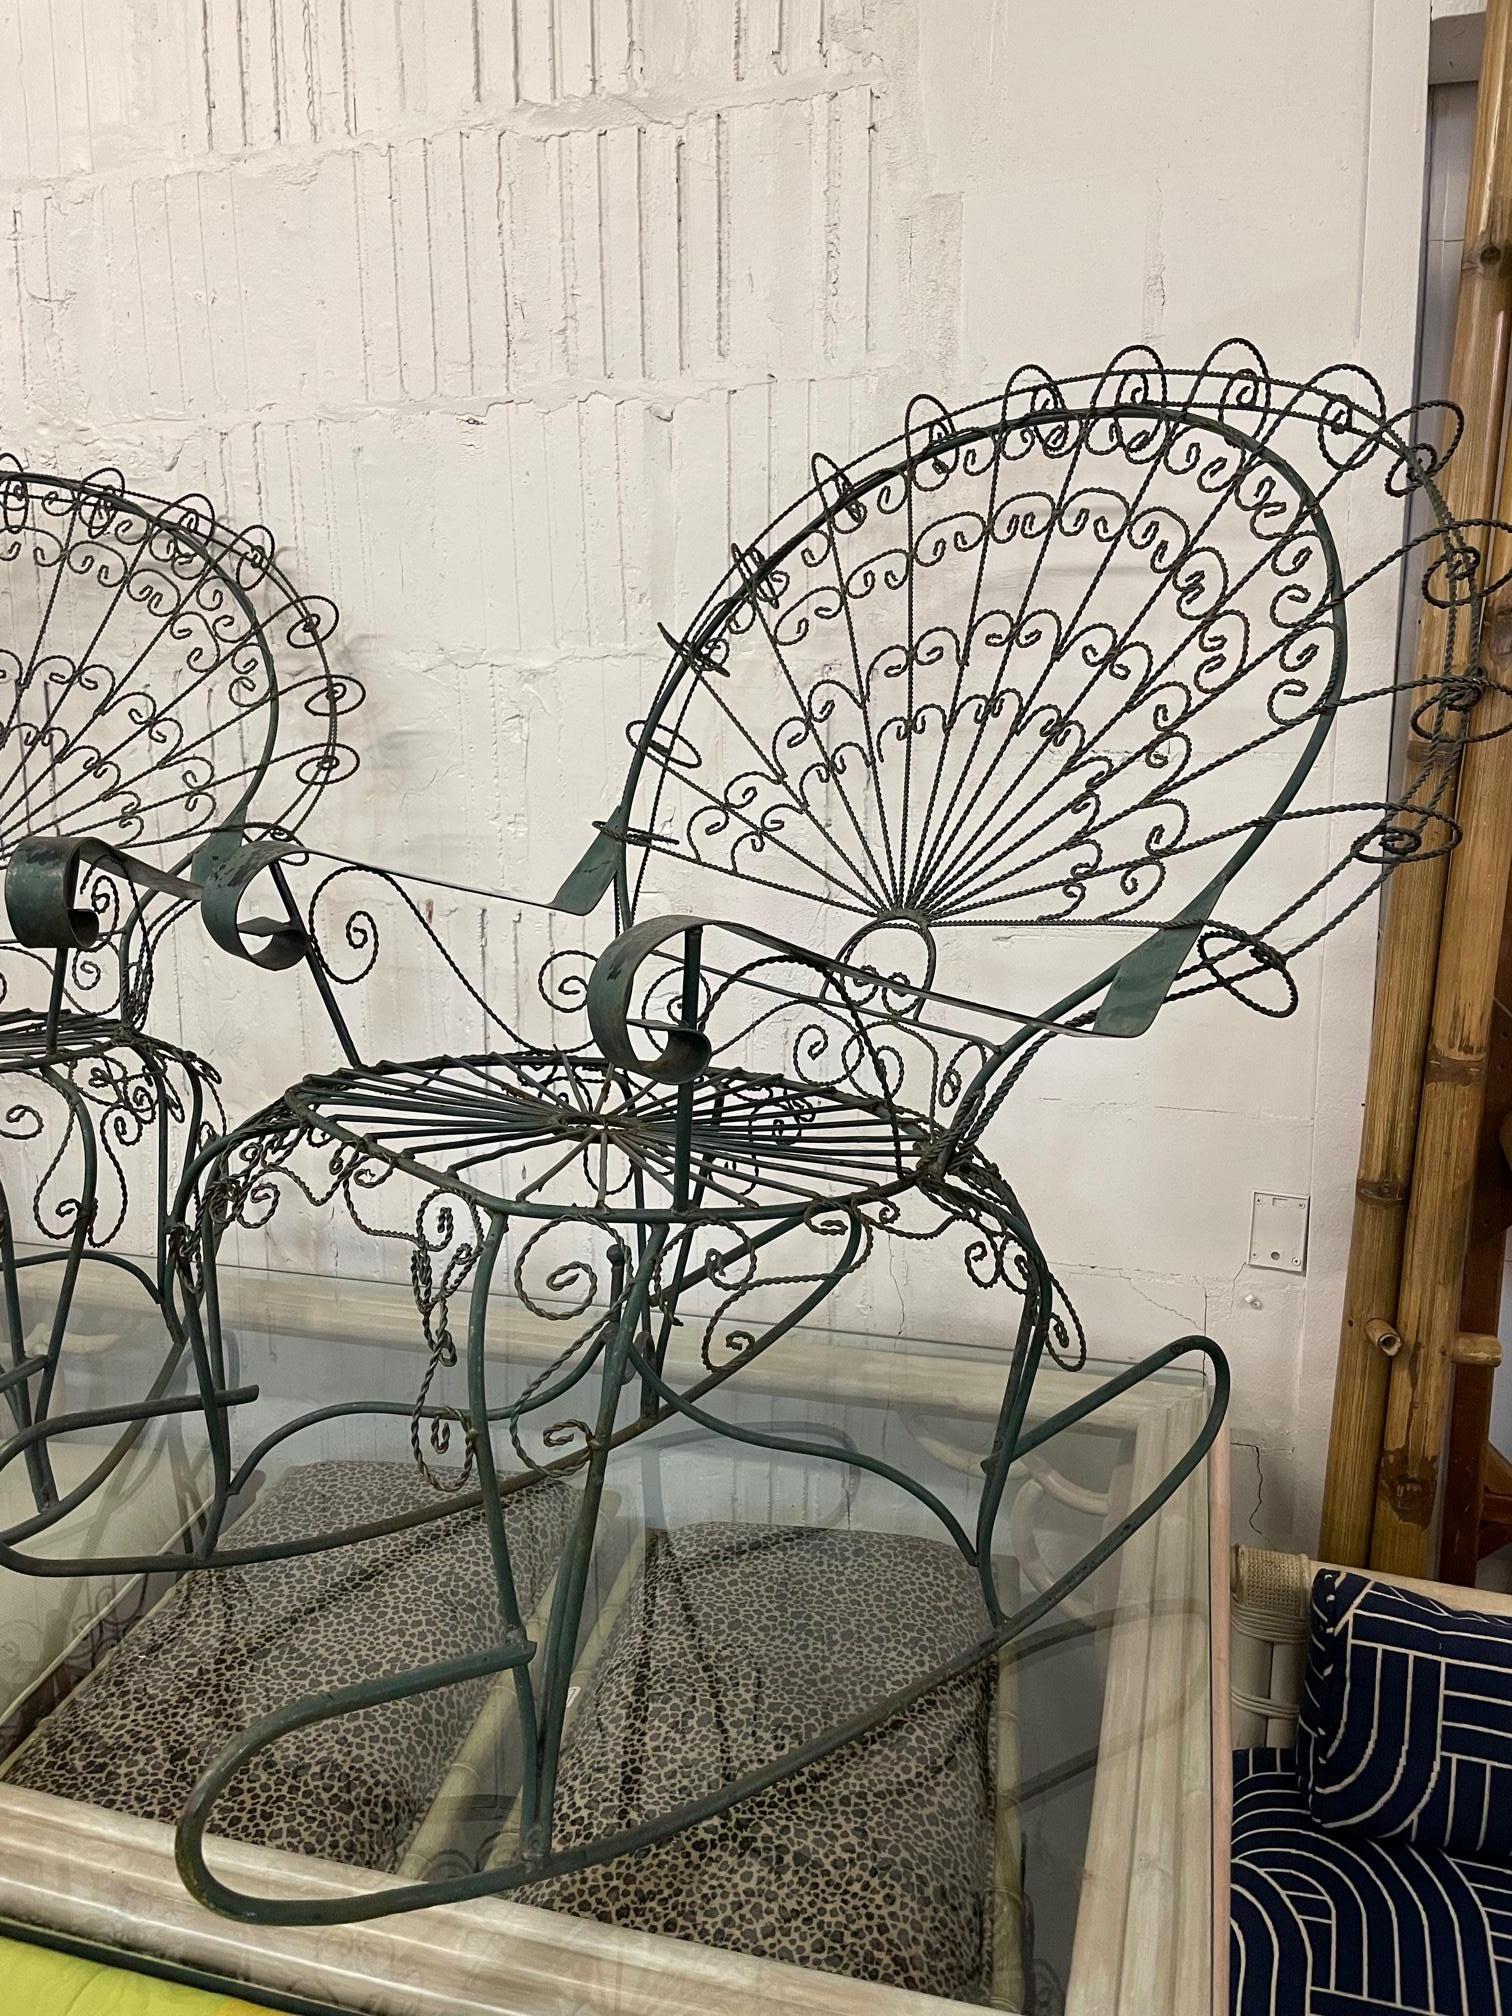 Set of two wrought iron peacock garden chairs attributed to Salterini (not marked) feature large fan backs and a twisted wire frame. Decorative scroll detailing in this Victorian style chair. Good condition with imperfections consistent with age.